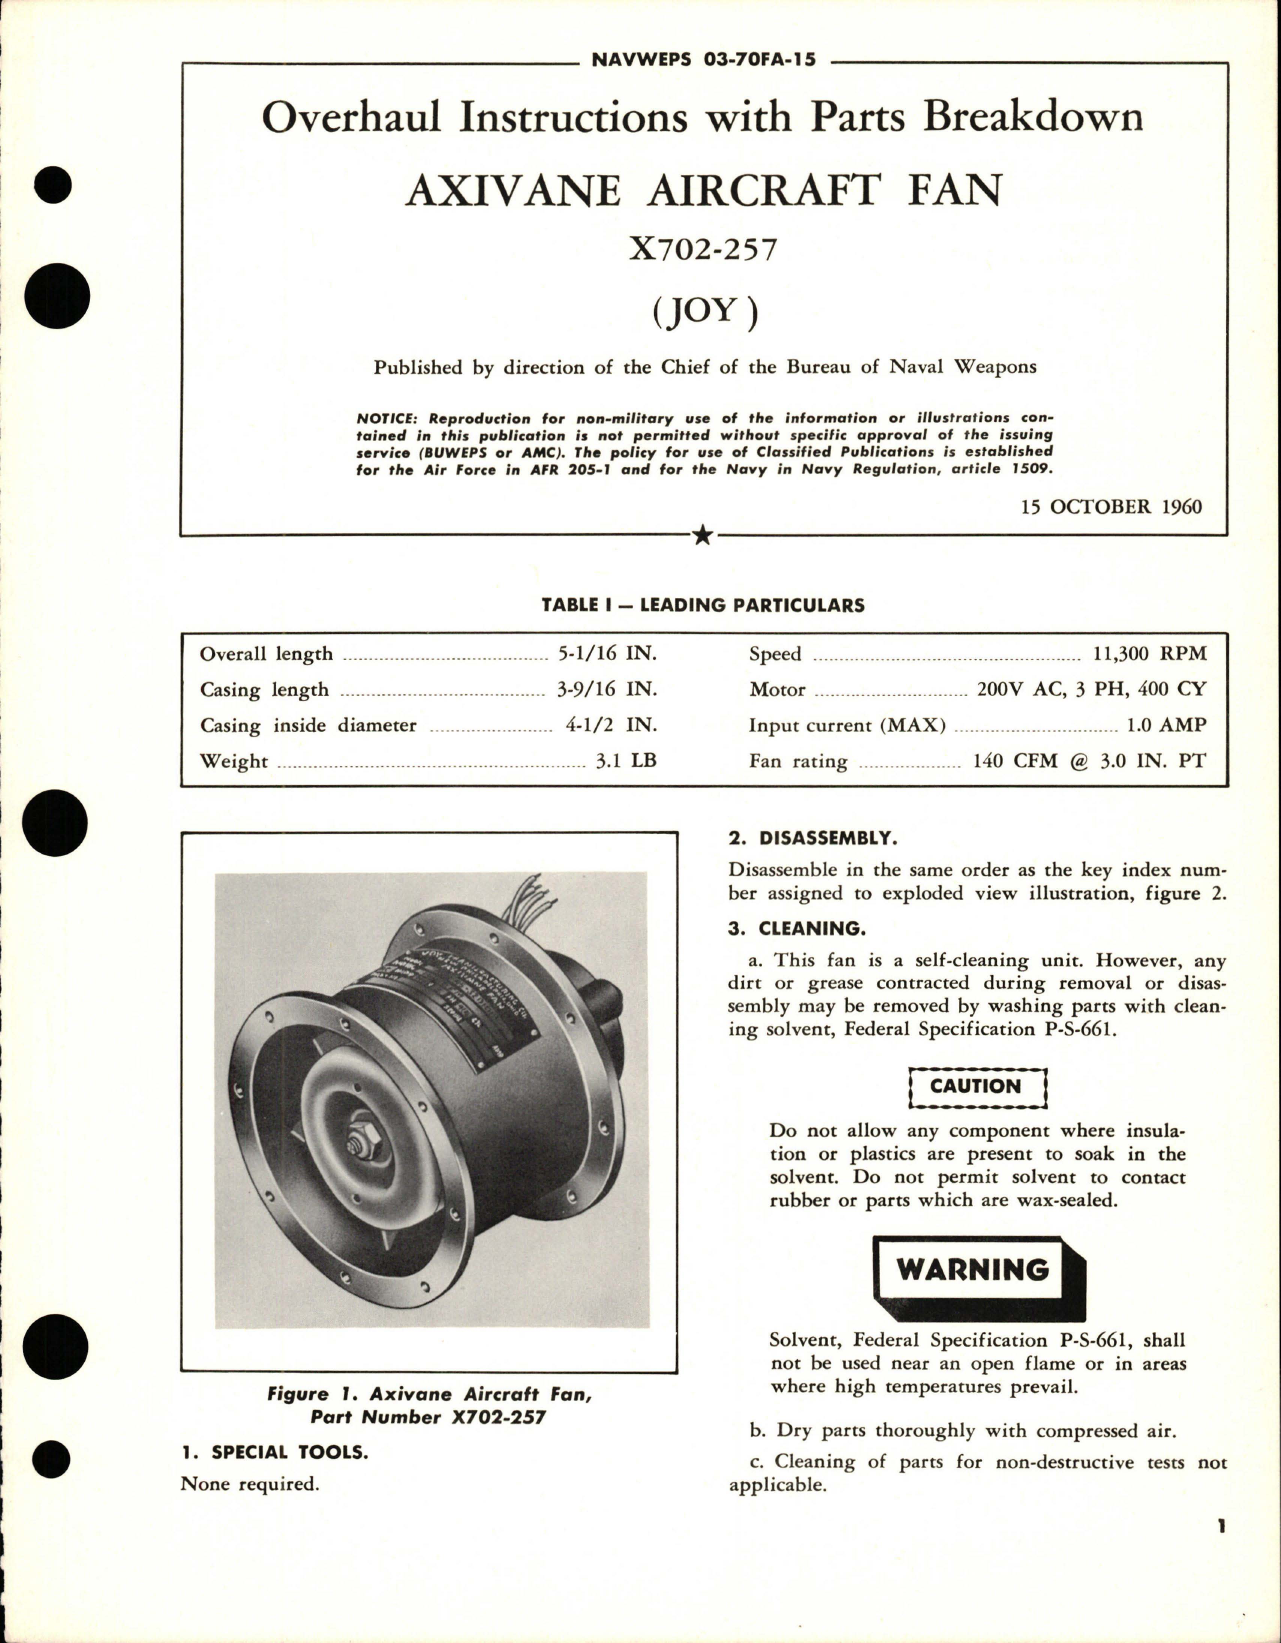 Sample page 1 from AirCorps Library document: Overhaul Instructions with Parts Breakdown for Axivane Aircraft Fan - X702-257 